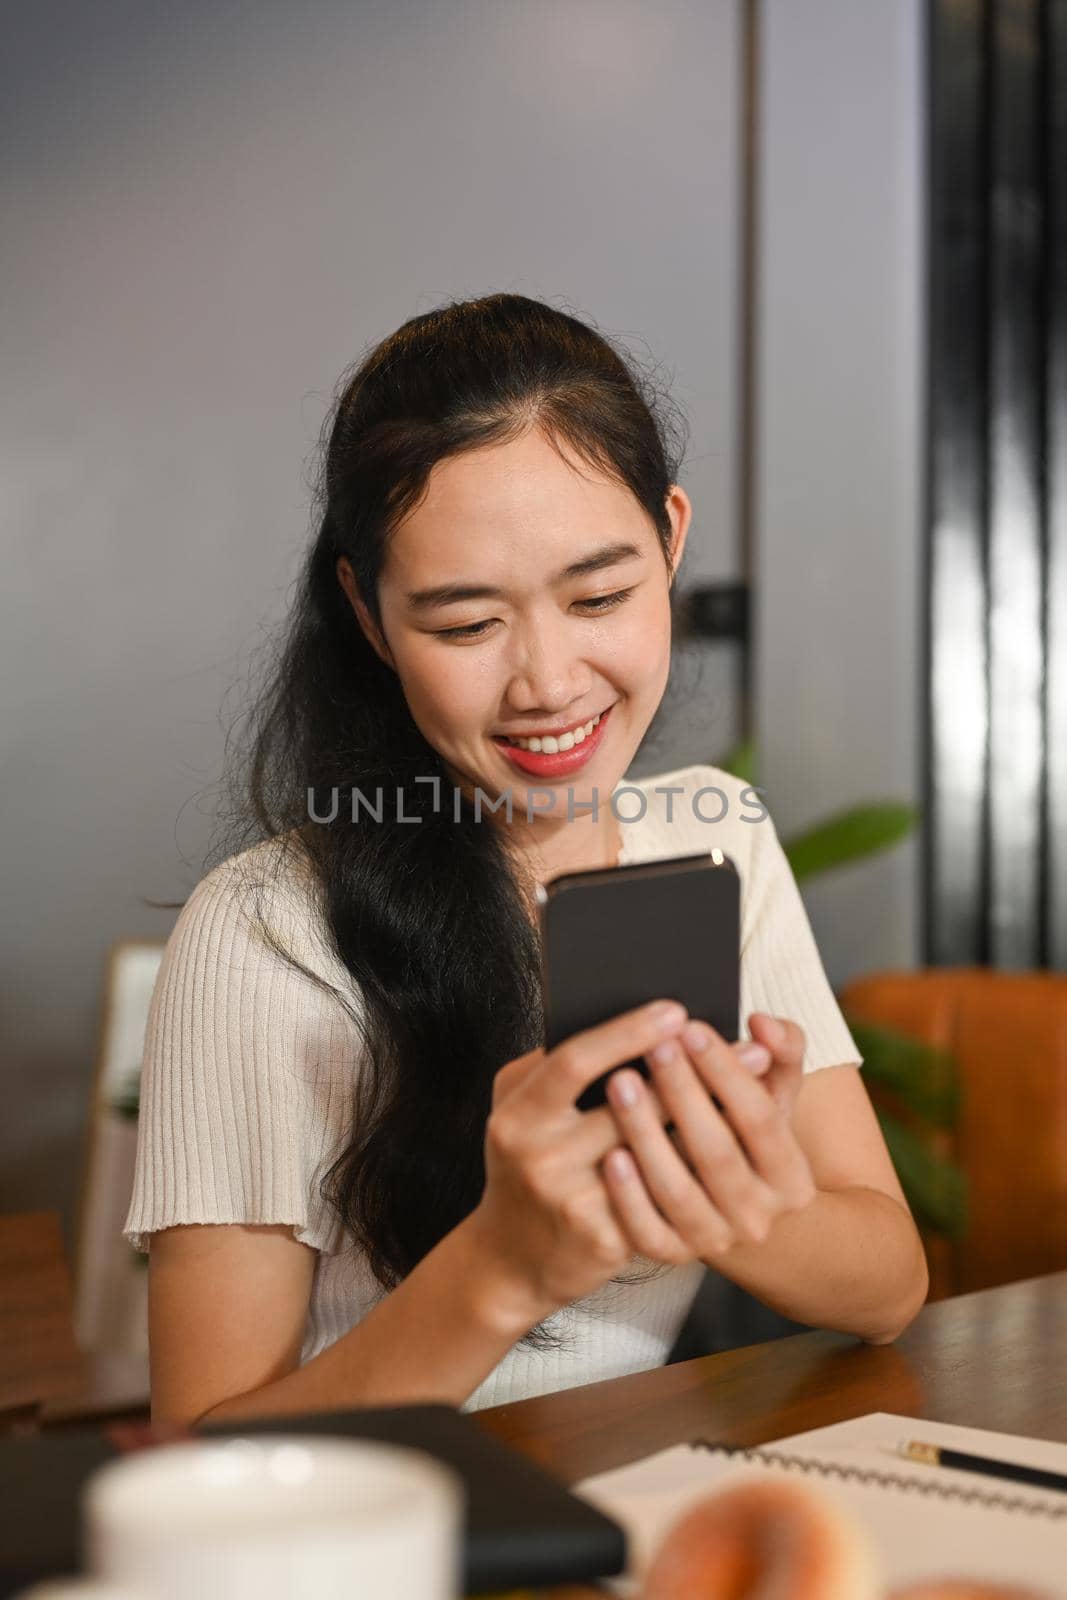 Smiling young woman sitting in her working desk and reading text on her mobile phone.